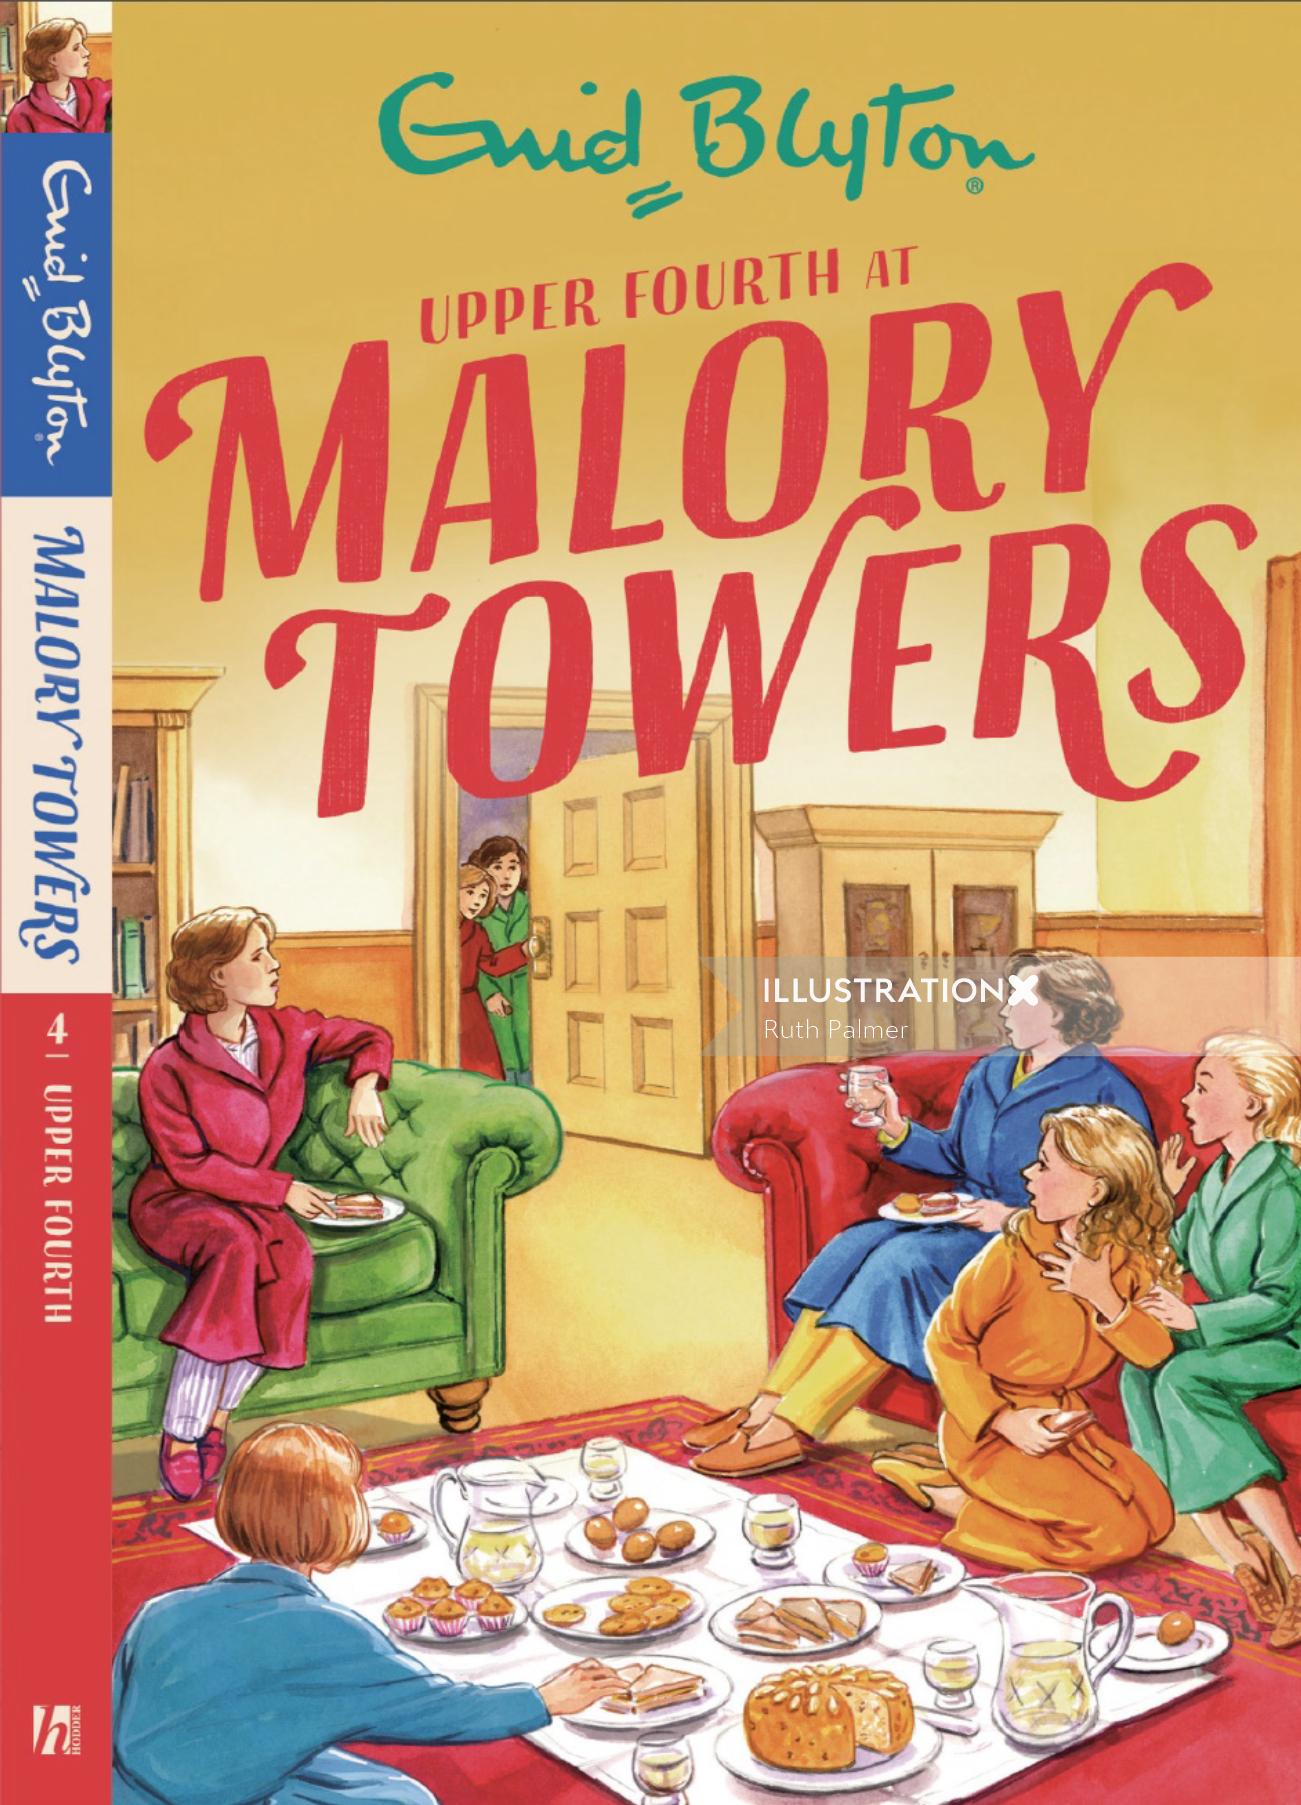 Malory towers book cover illustration by ruth palmer